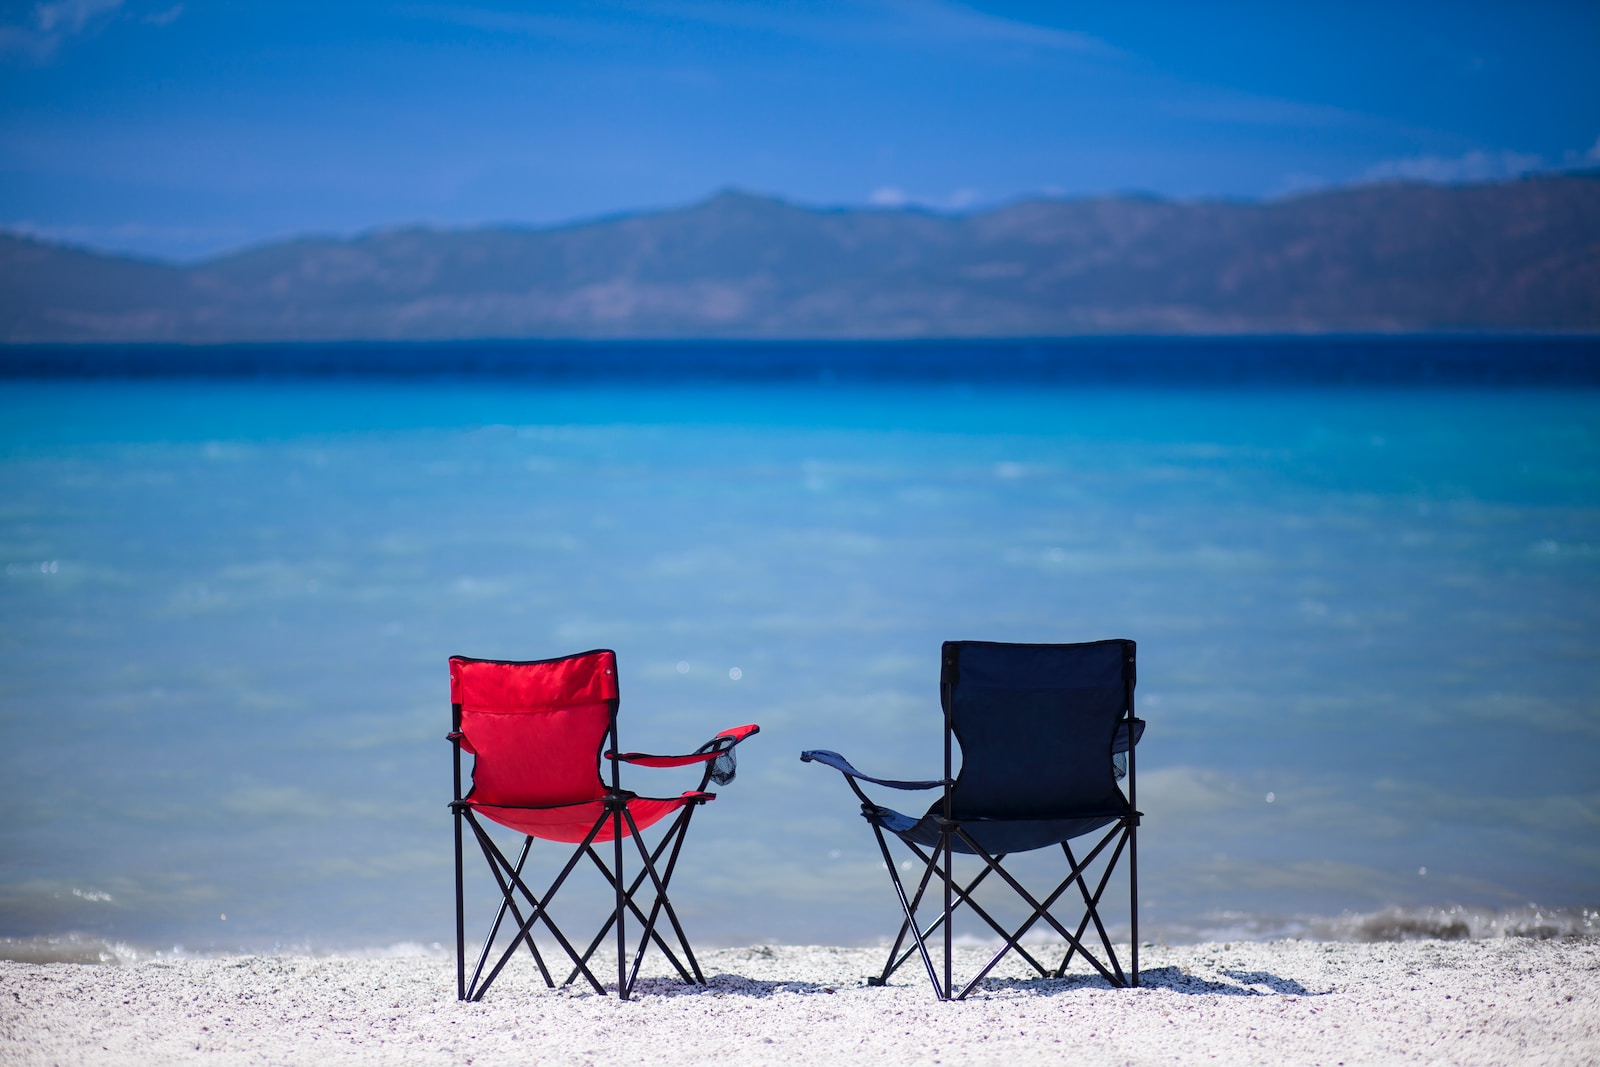 red and black folding chair on white sand during daytime, 11 Beach Travel Essentials to Pack – Minimalist Approach [Plus Packing List], essential beach items, Beach Footwear Choices, minimalist packing for beach vacation, beach trip essentials, Water-Resistant Tech Gear, UV-Protection Essentials, Minimalist Beach Packing